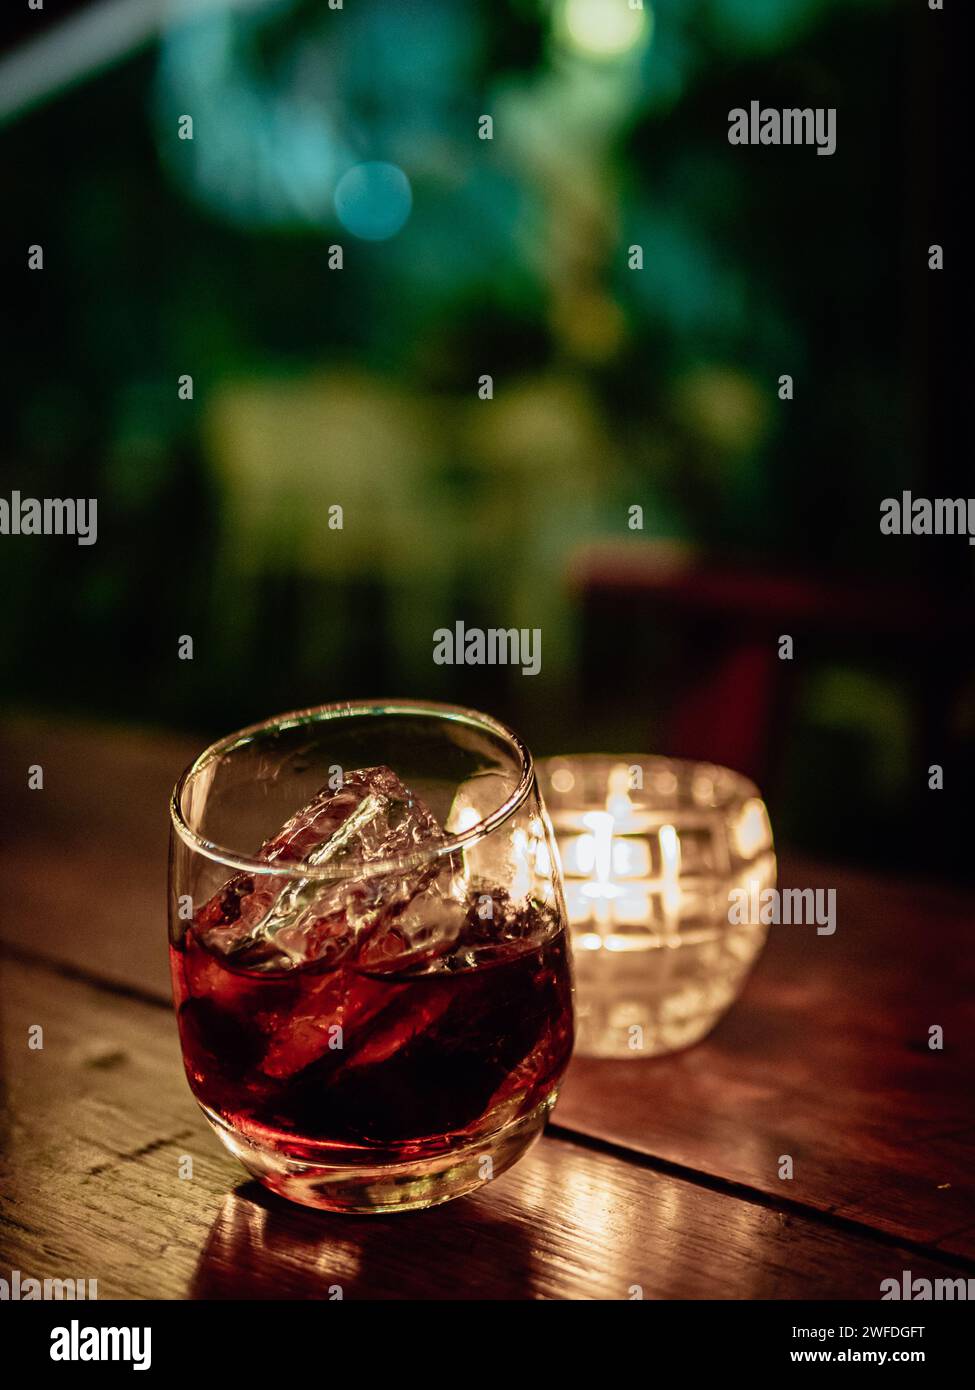 Glass of whisky with ice on wooden table against dark background. Elegant and refreshing glass of scotch bourbon whisky on ice with glowing illuminate Stock Photo